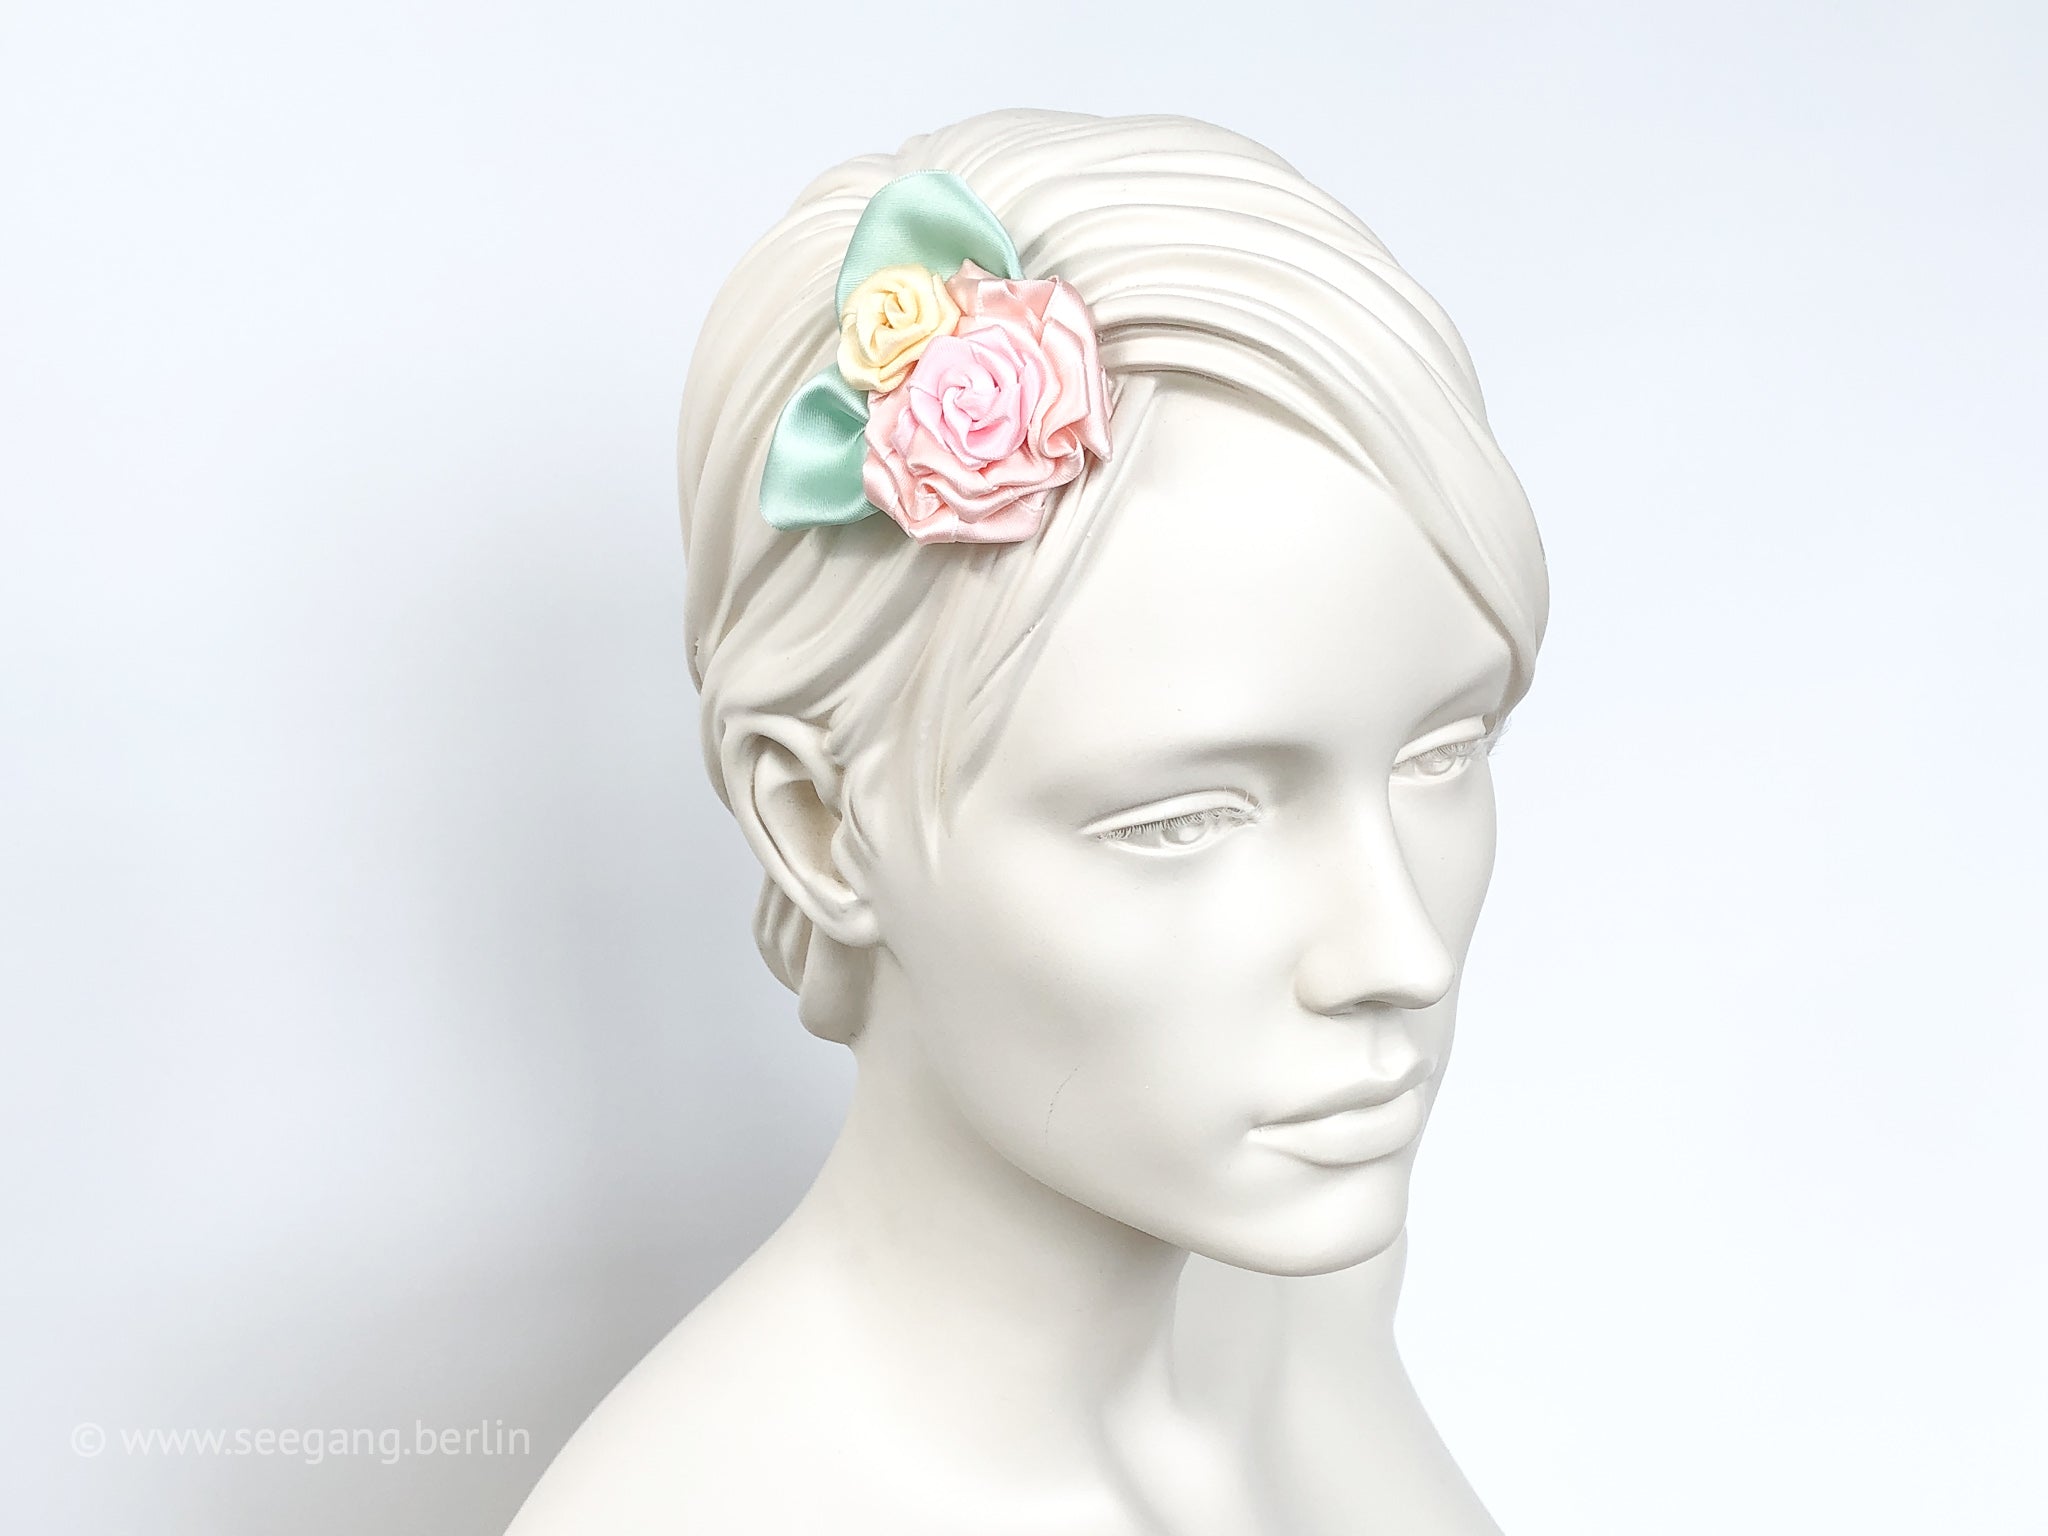 Fascinator, Hair flowers with roses in pastel colors yellow, pink, orange and mint colored leaves.